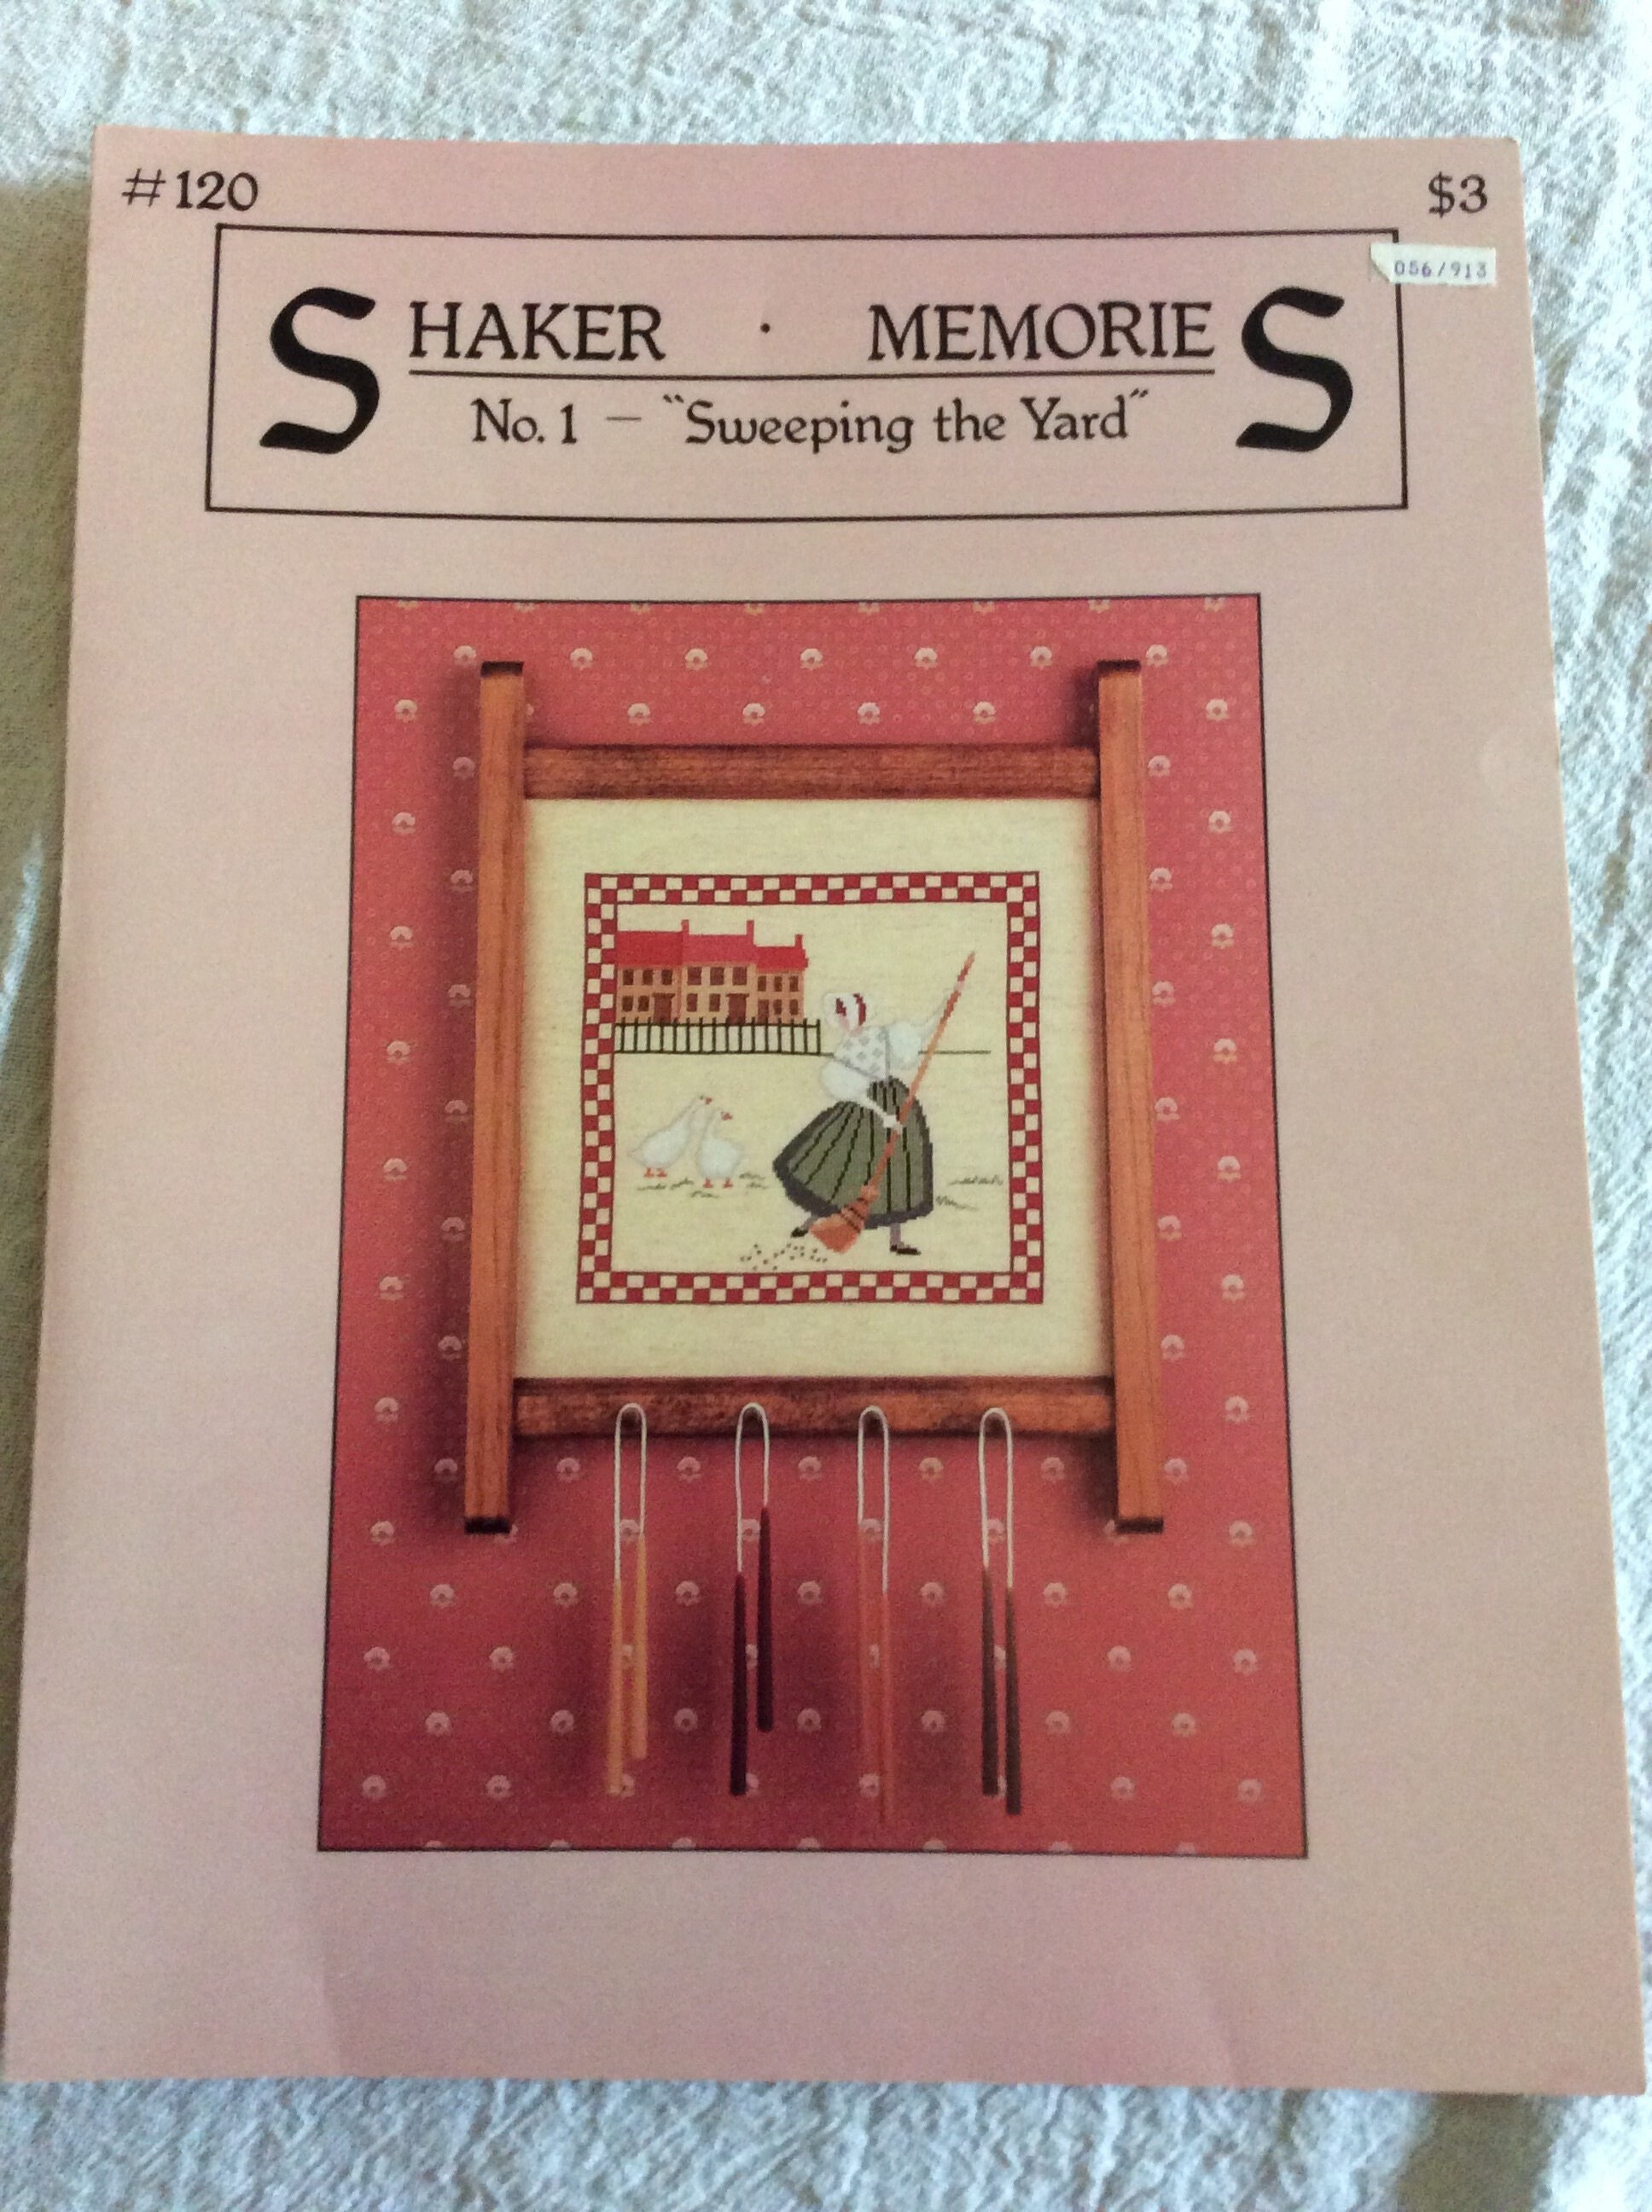 The Best Things in Life Cross Stitch Pattern Book 15 Karen Bowdish June  Grigg